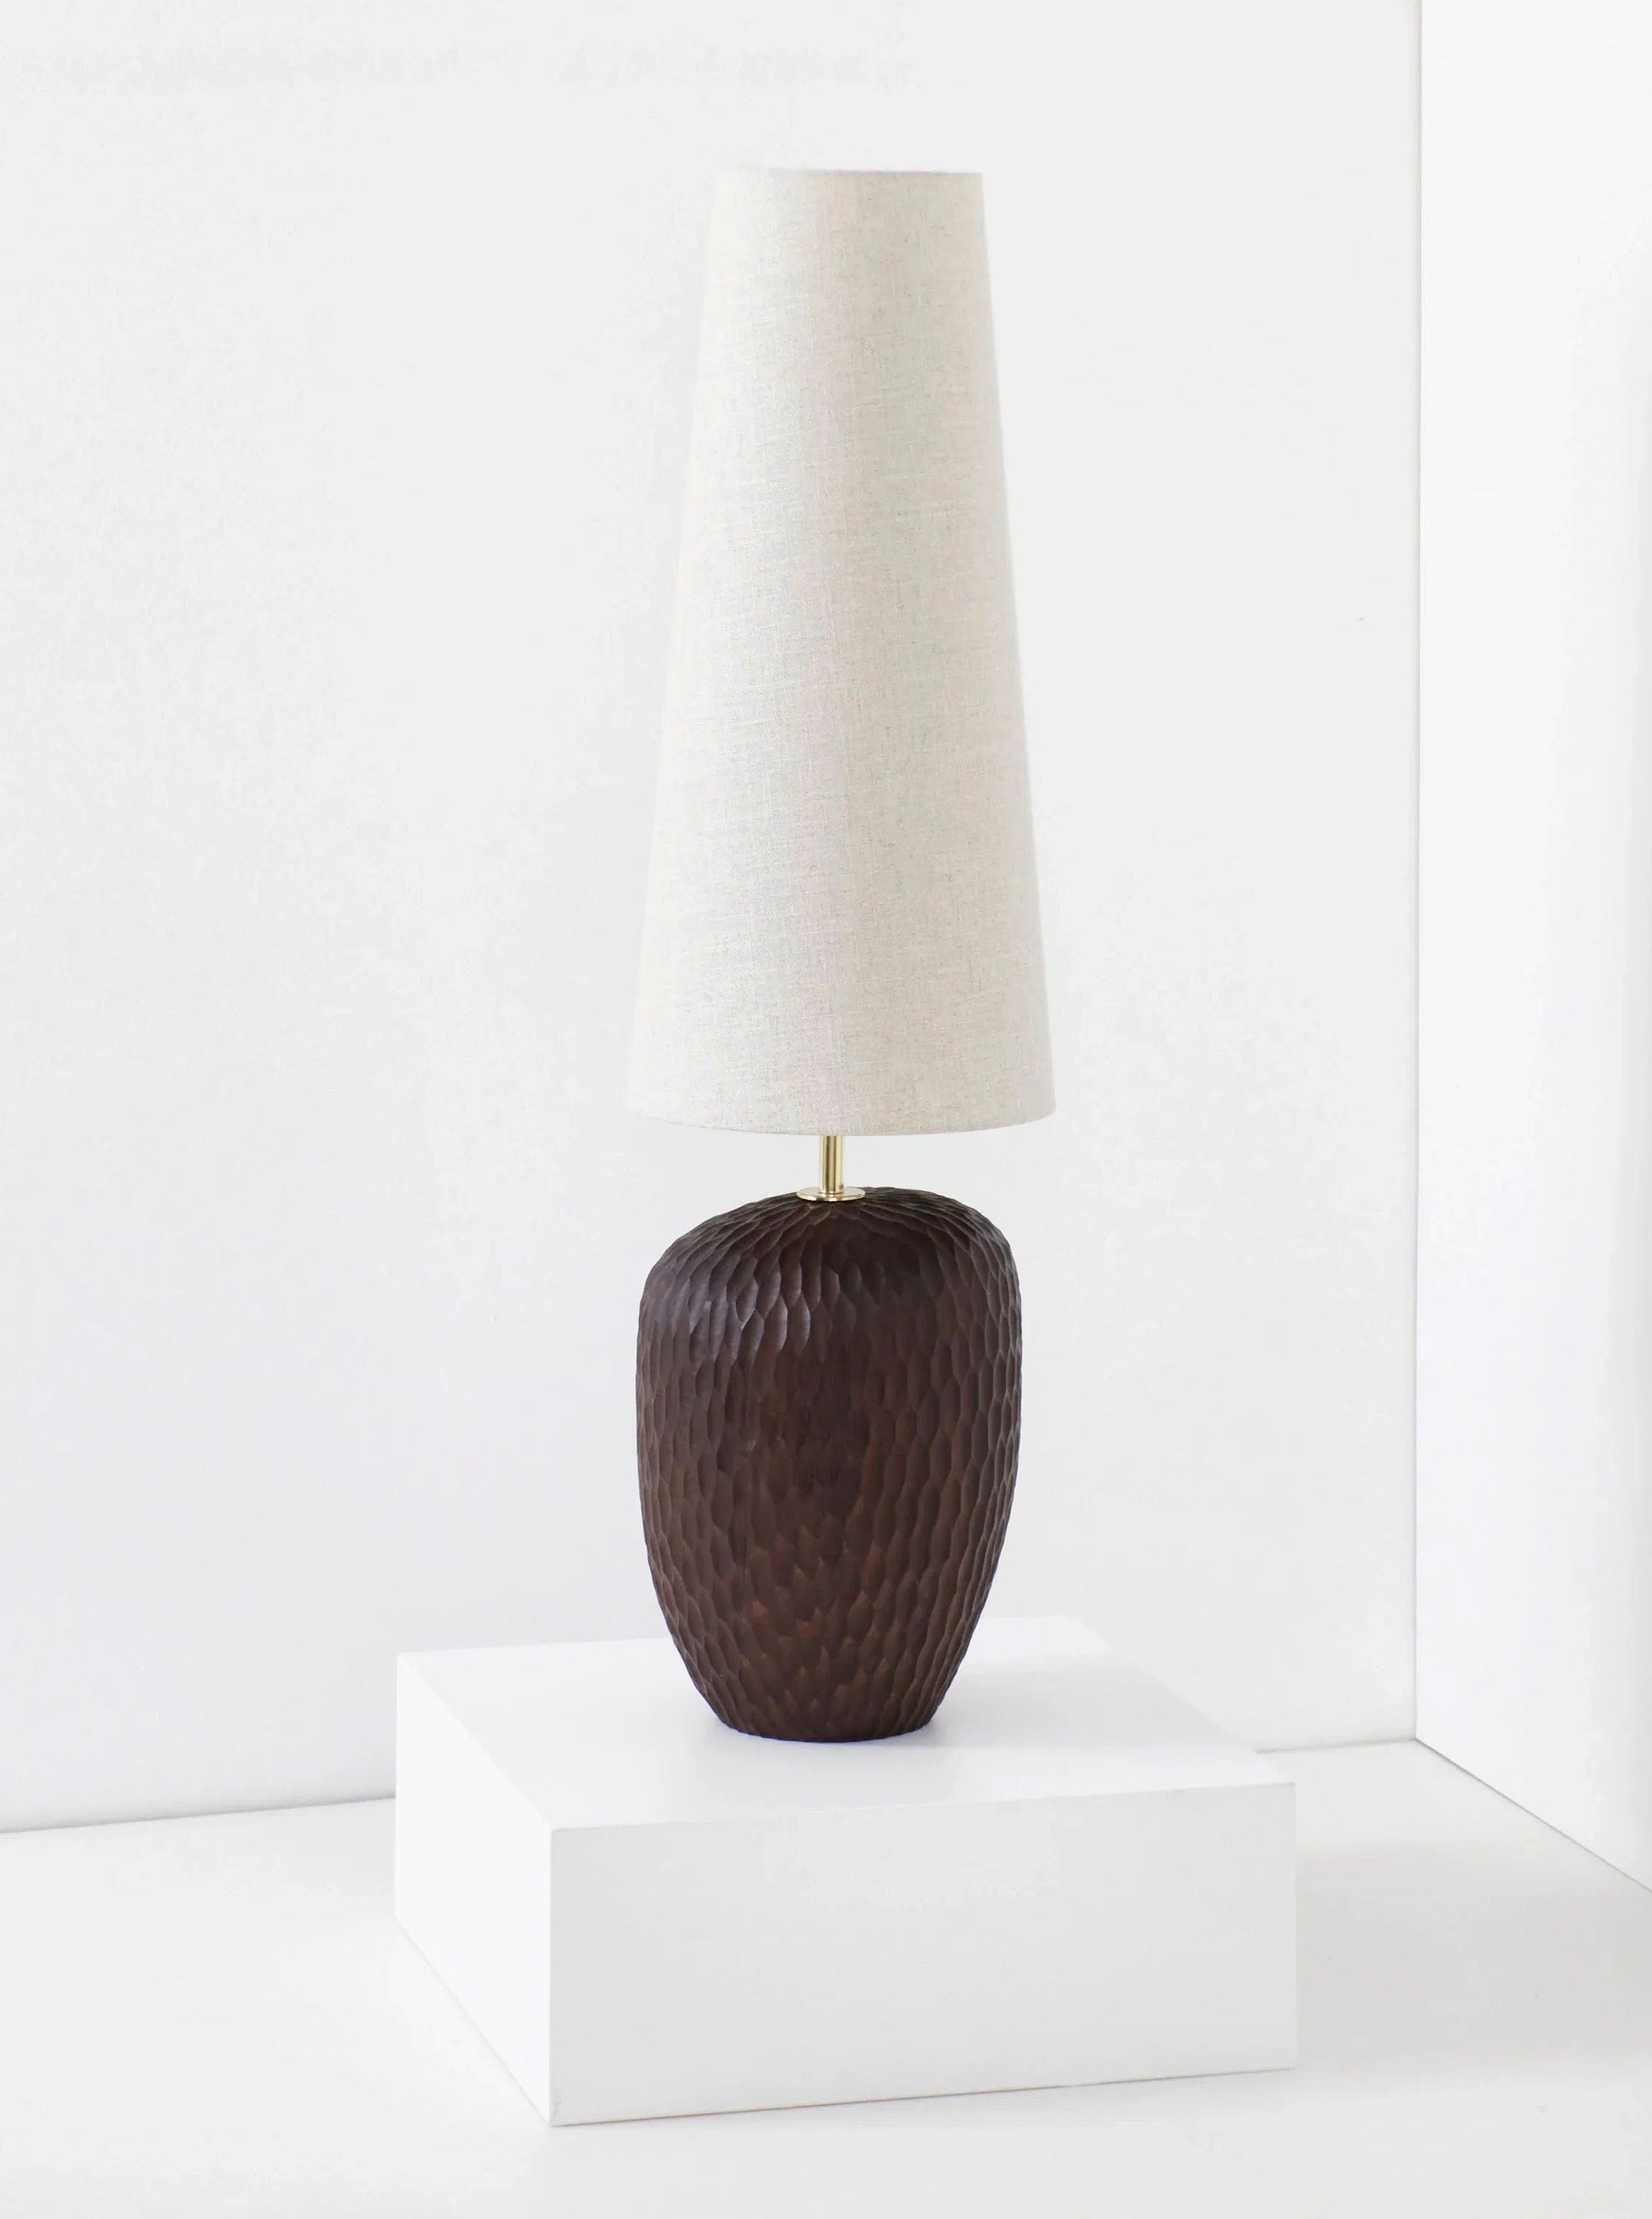 A tall, modern Project 213A Large Foz Lamp with a textured dark brown solid wood base and an elongated, tapered white lampshade is placed on a white pedestal against a plain white background.